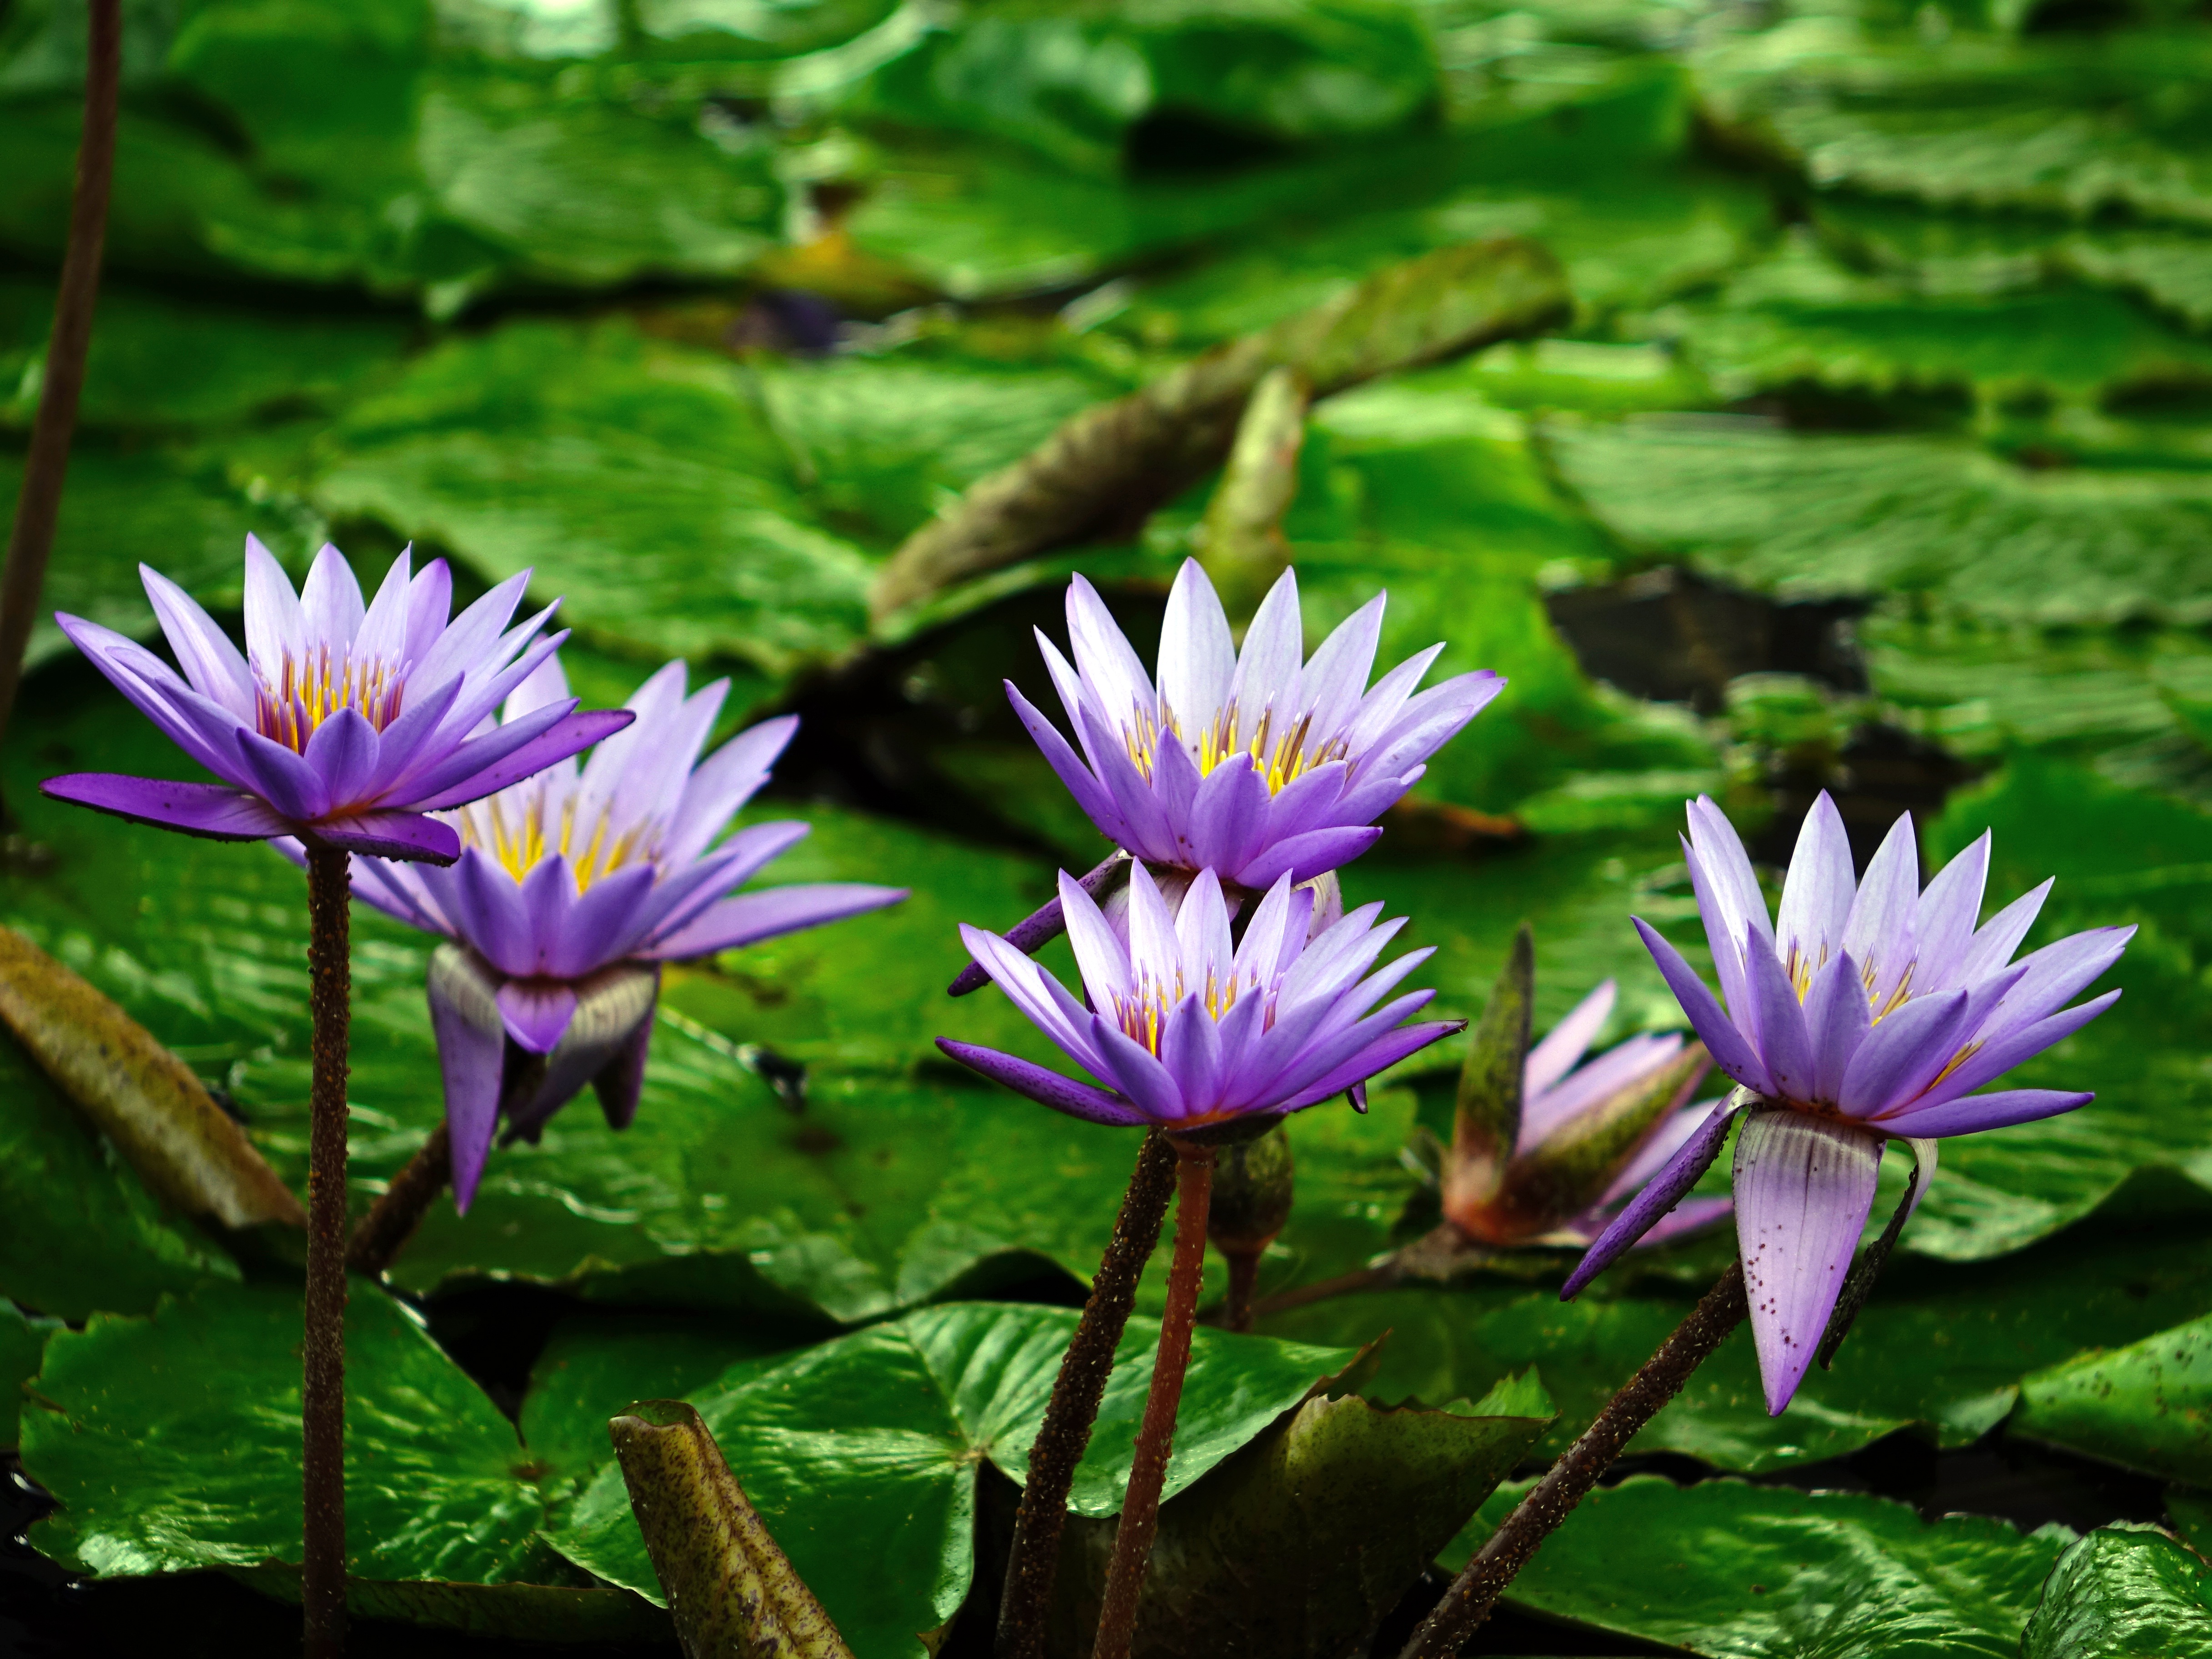 Earth Flower Lily Pad Pond Purple Flower Water Lily 4864x3648